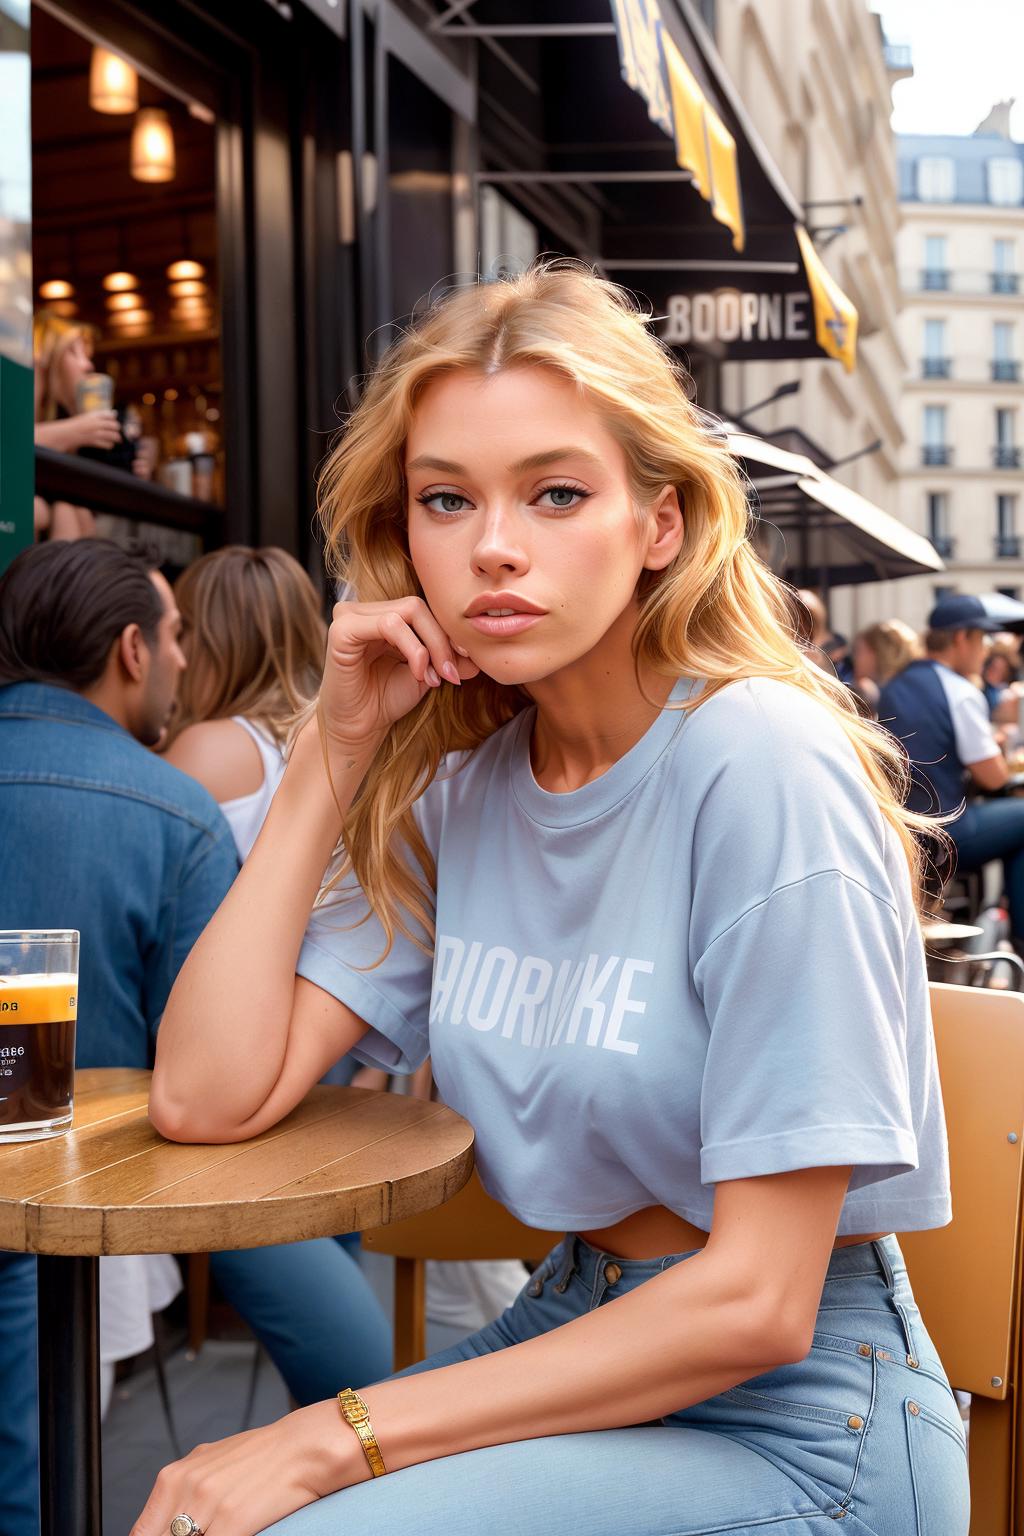 A beautiful blonde woman in a blue shirt poses for a picture at a cafe.